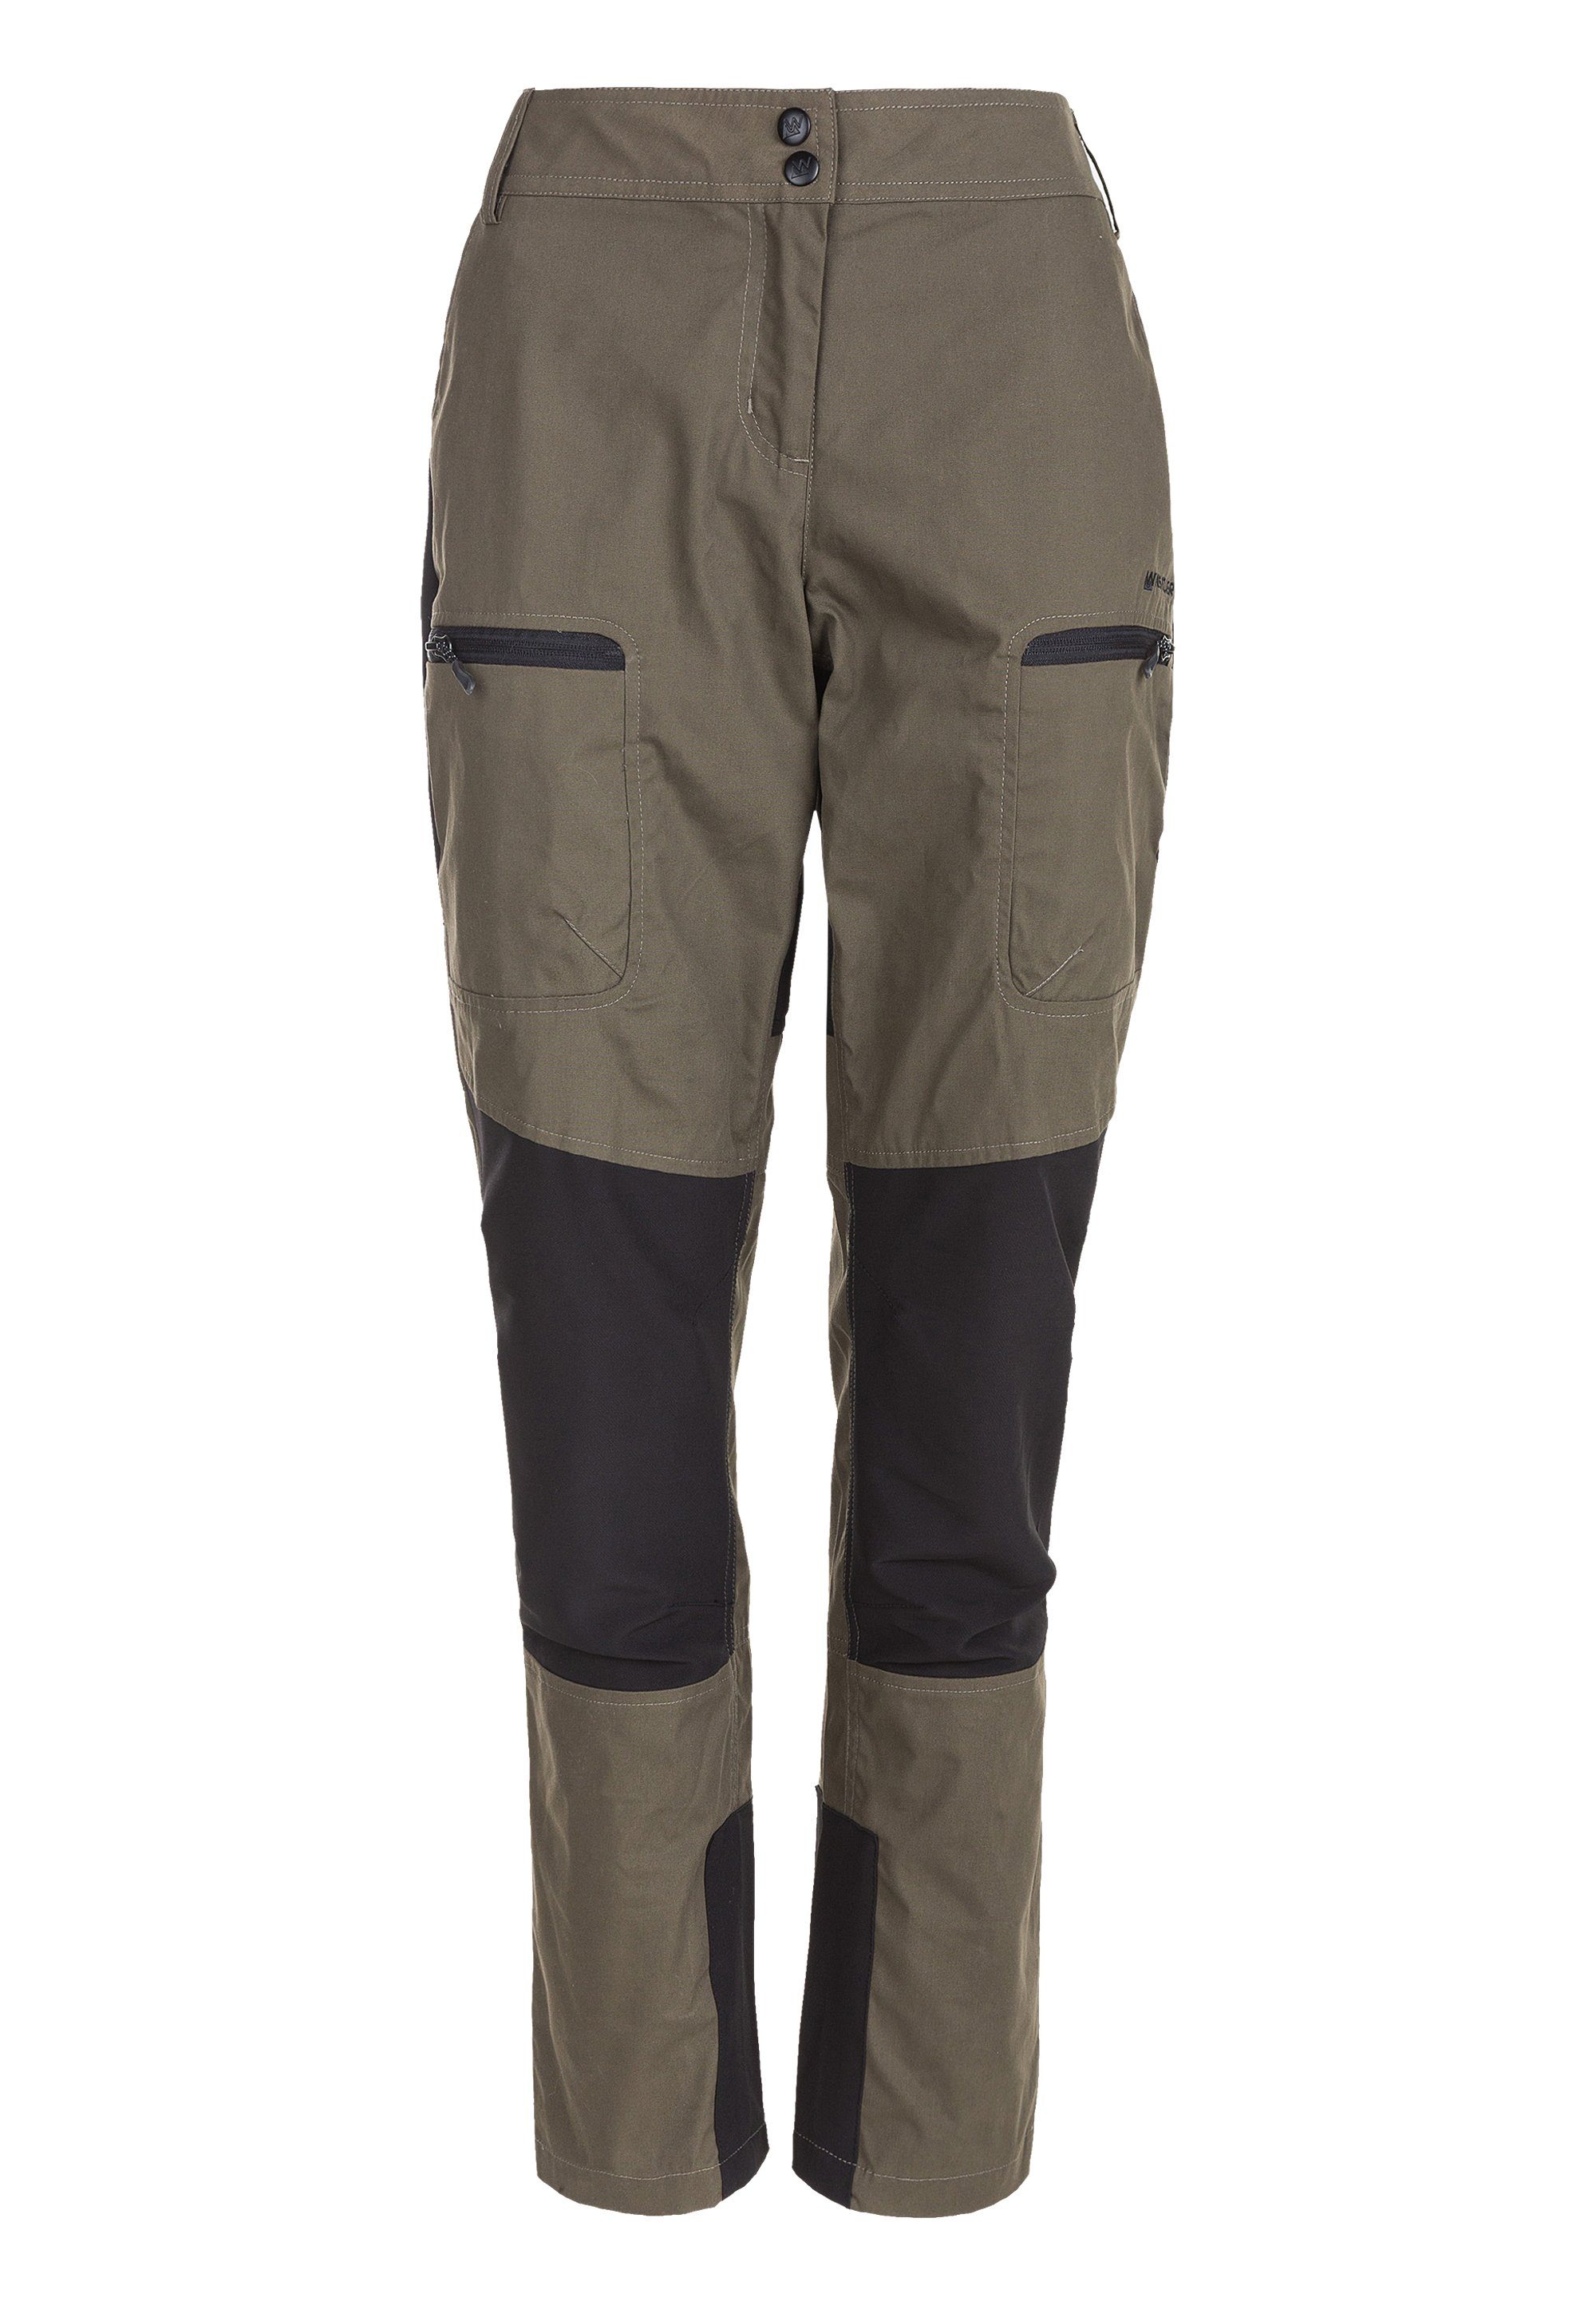 Cargohose WHISTLER funktionalen Kniepatches ACTIV BLEE PANTS mit W